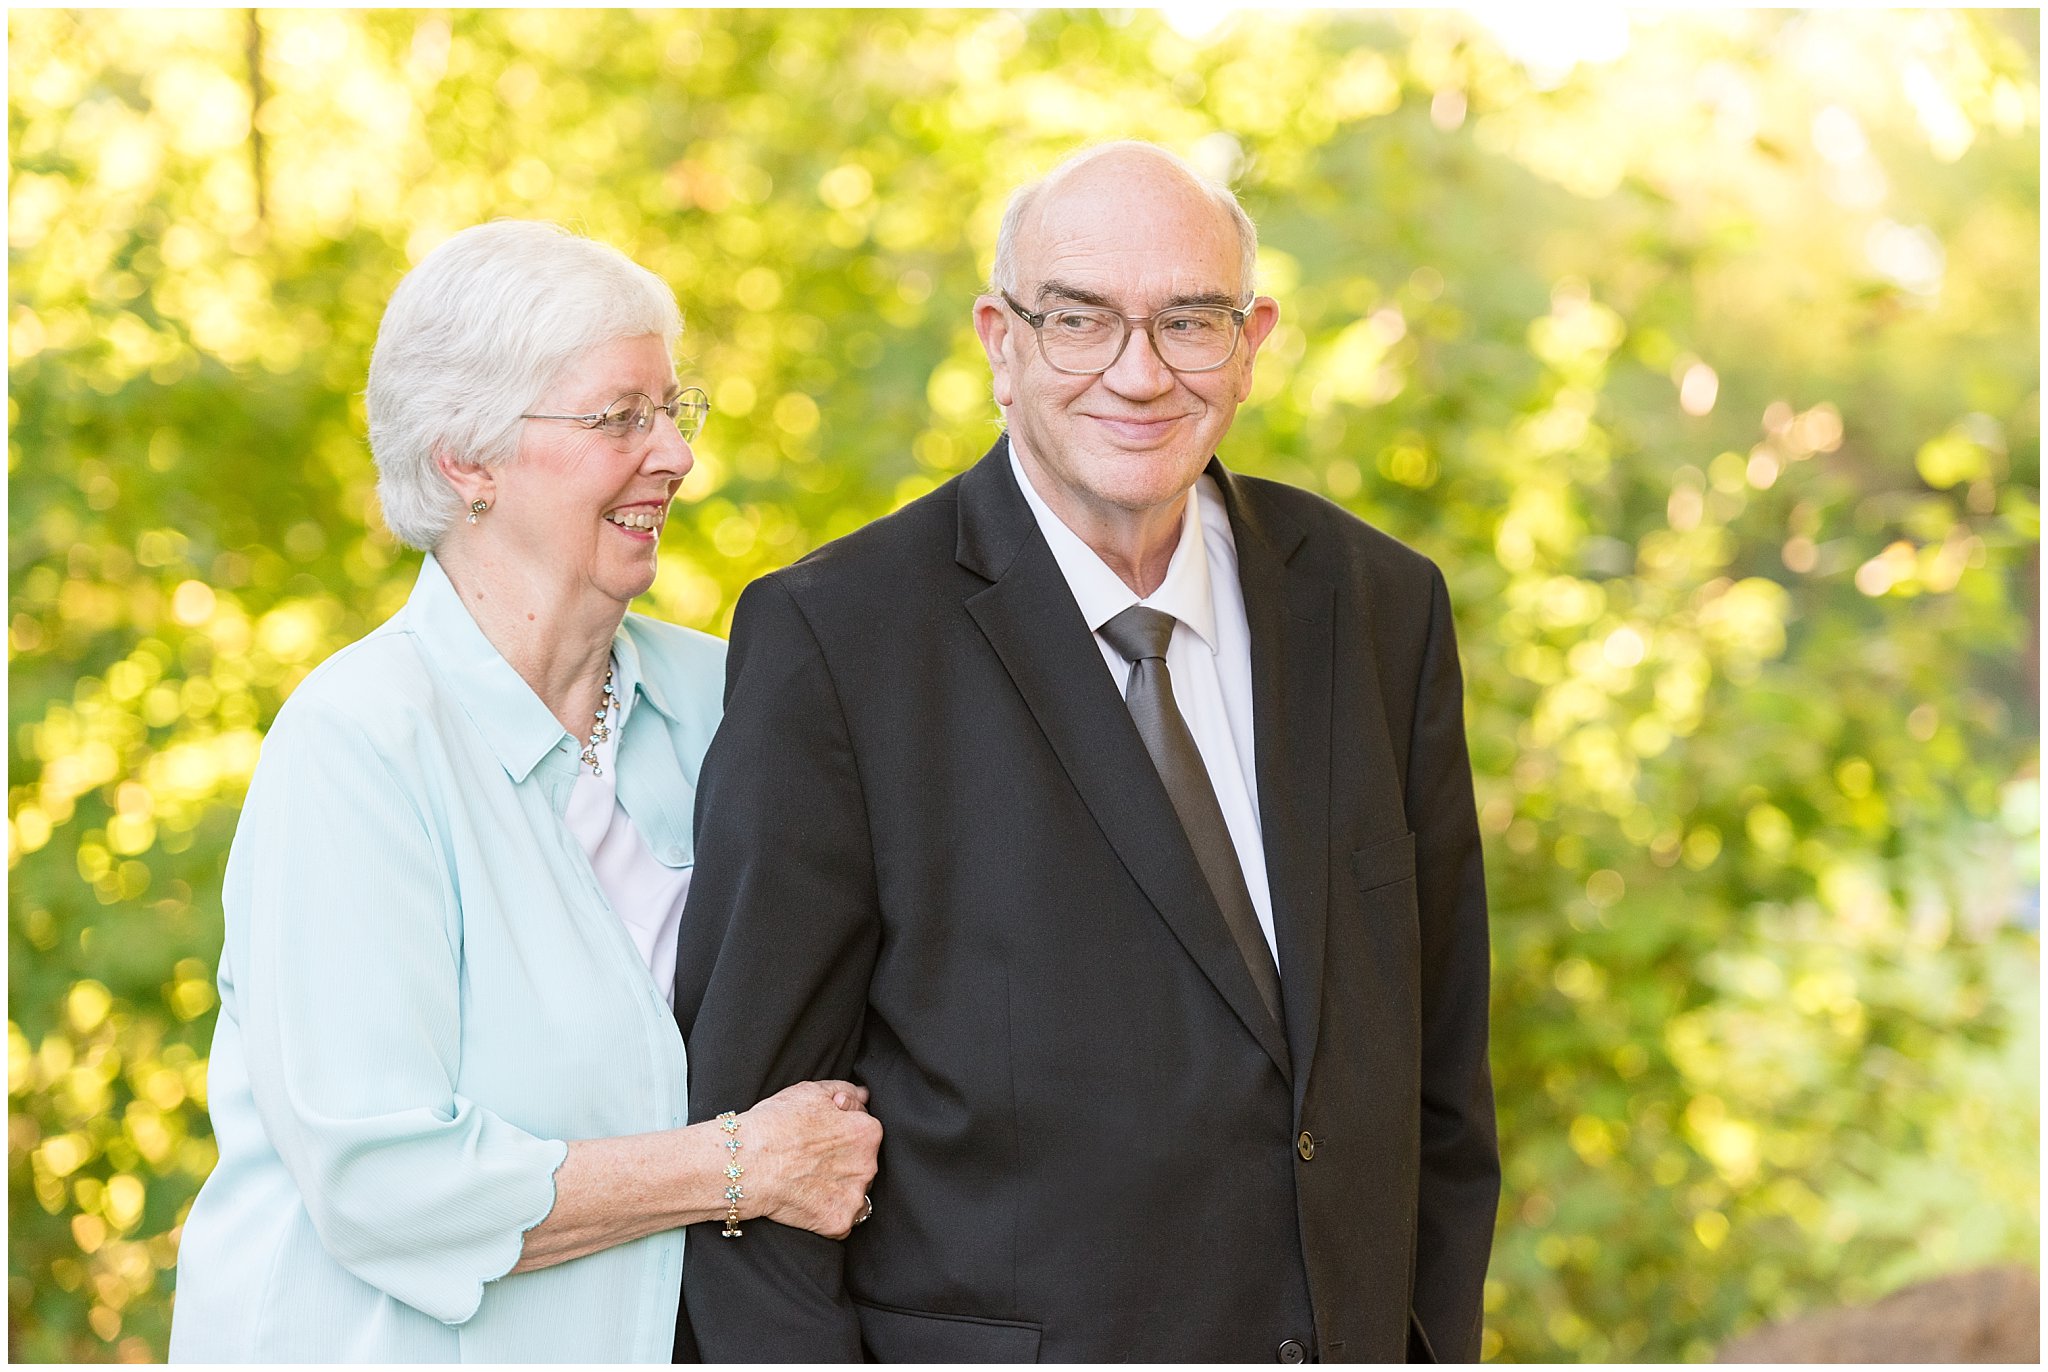 Grandpa pulling a face and grandma laughing | Layton Commons Park | Layton Couples Photographer | Jessie and Dallin